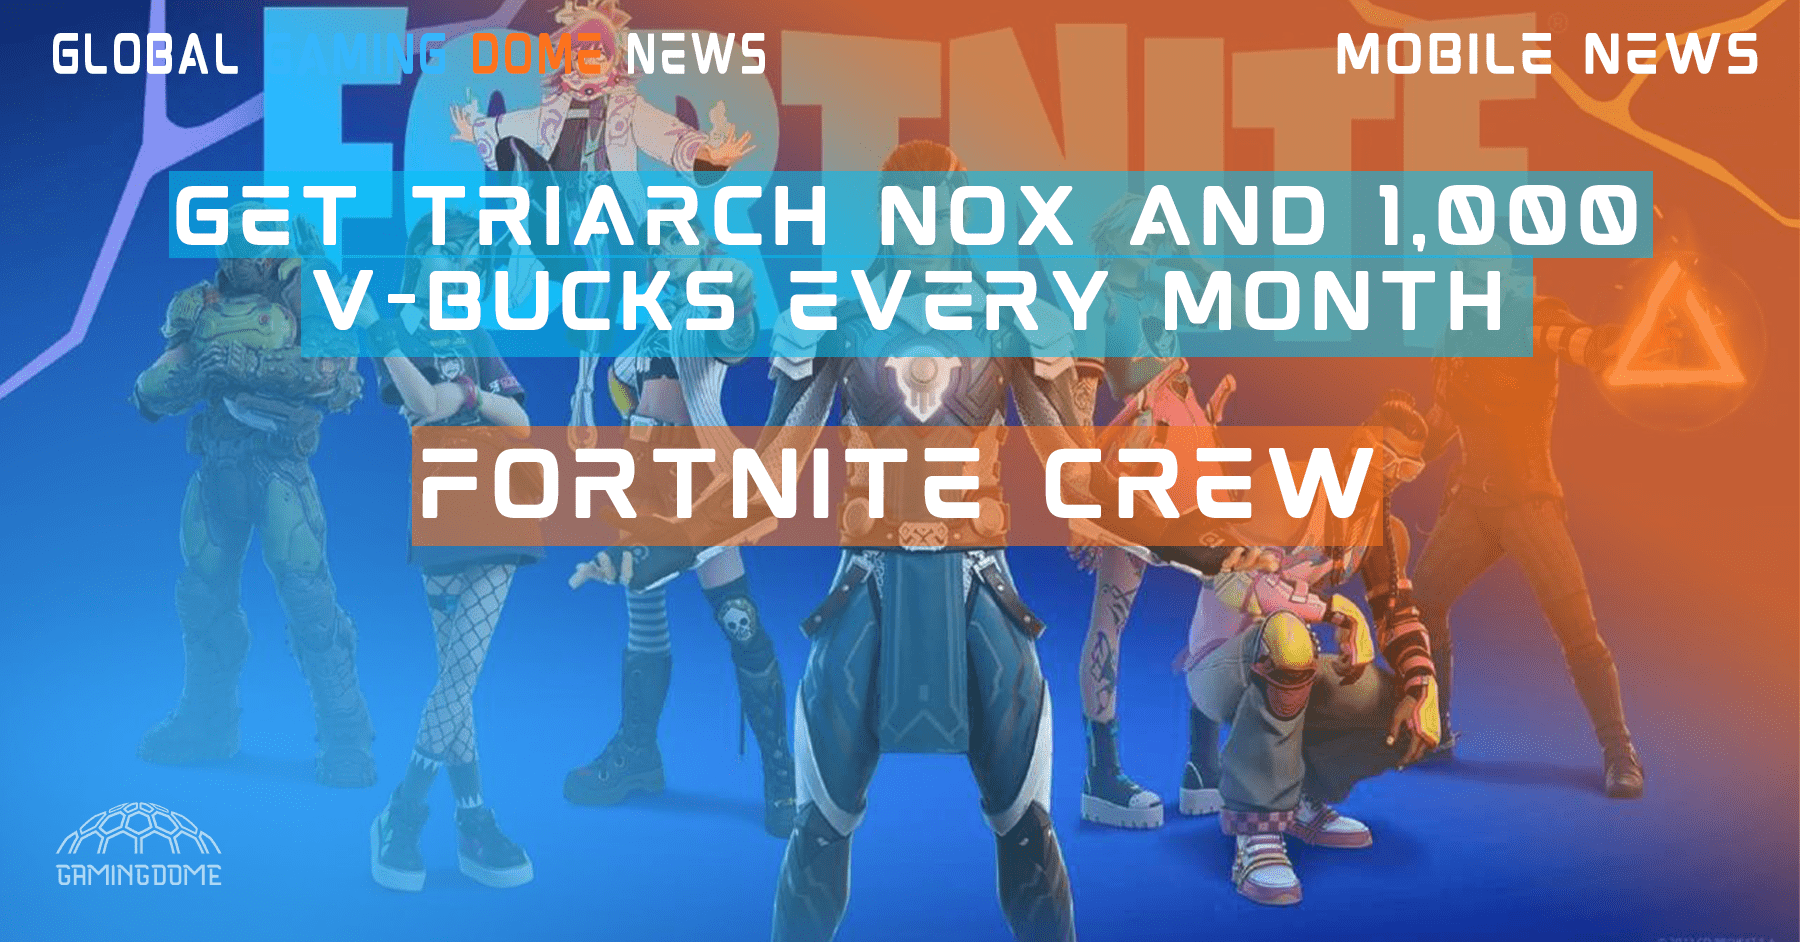 GET TRIARCH NOX AND 1,000 V-BUCKS EVERY MONTH WITH FORTNITE CREW